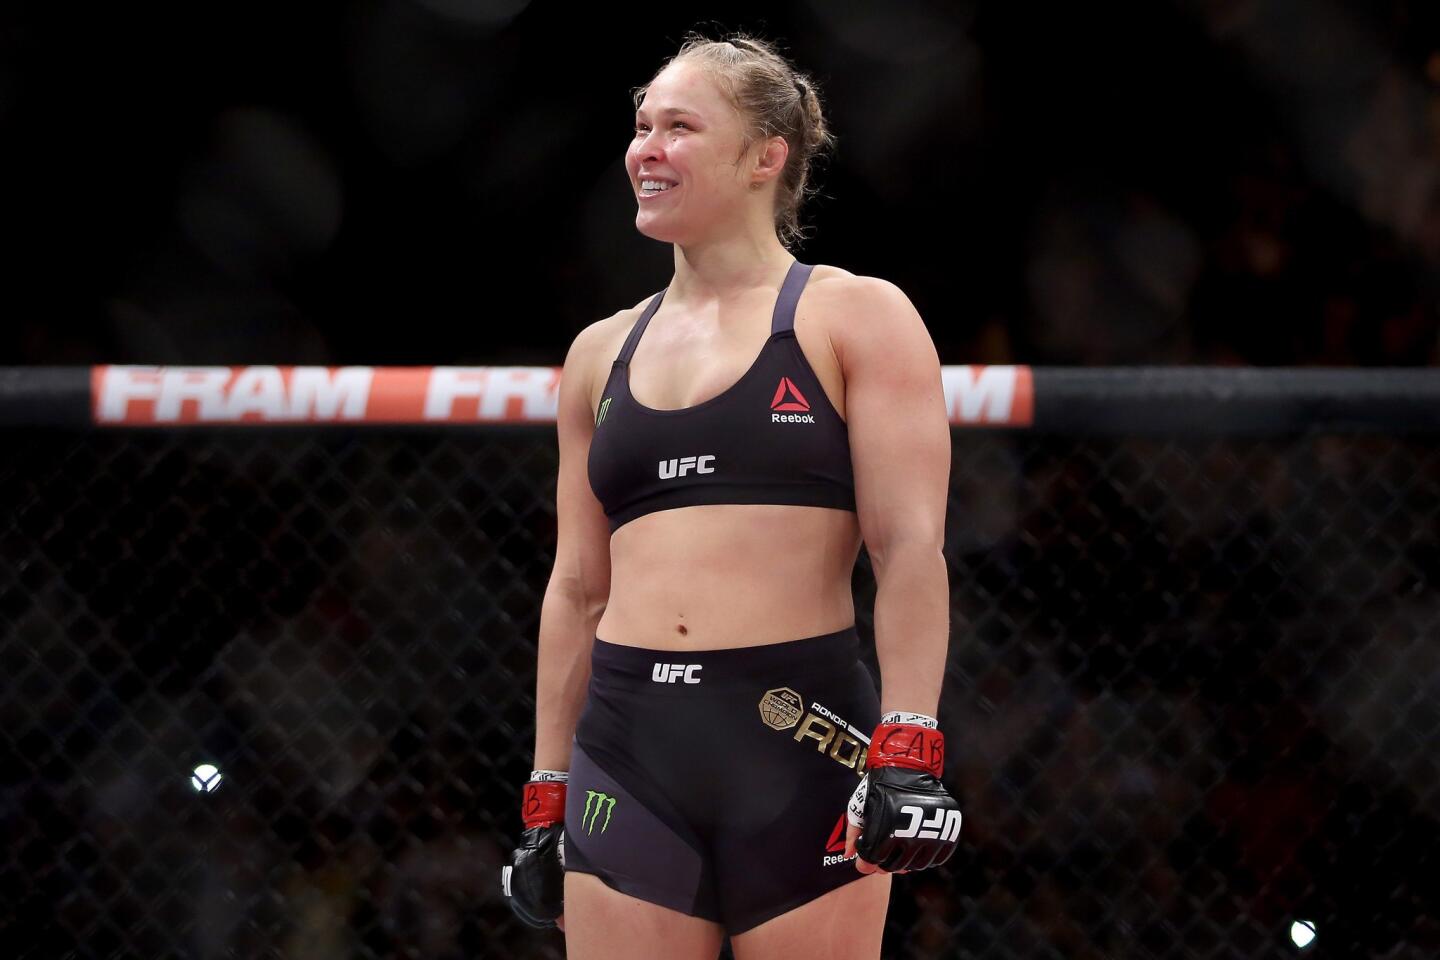 Ronda Rousey enjoys the moment after defending her UFC bantamweight belt against Bethe Correia on Saturday night.